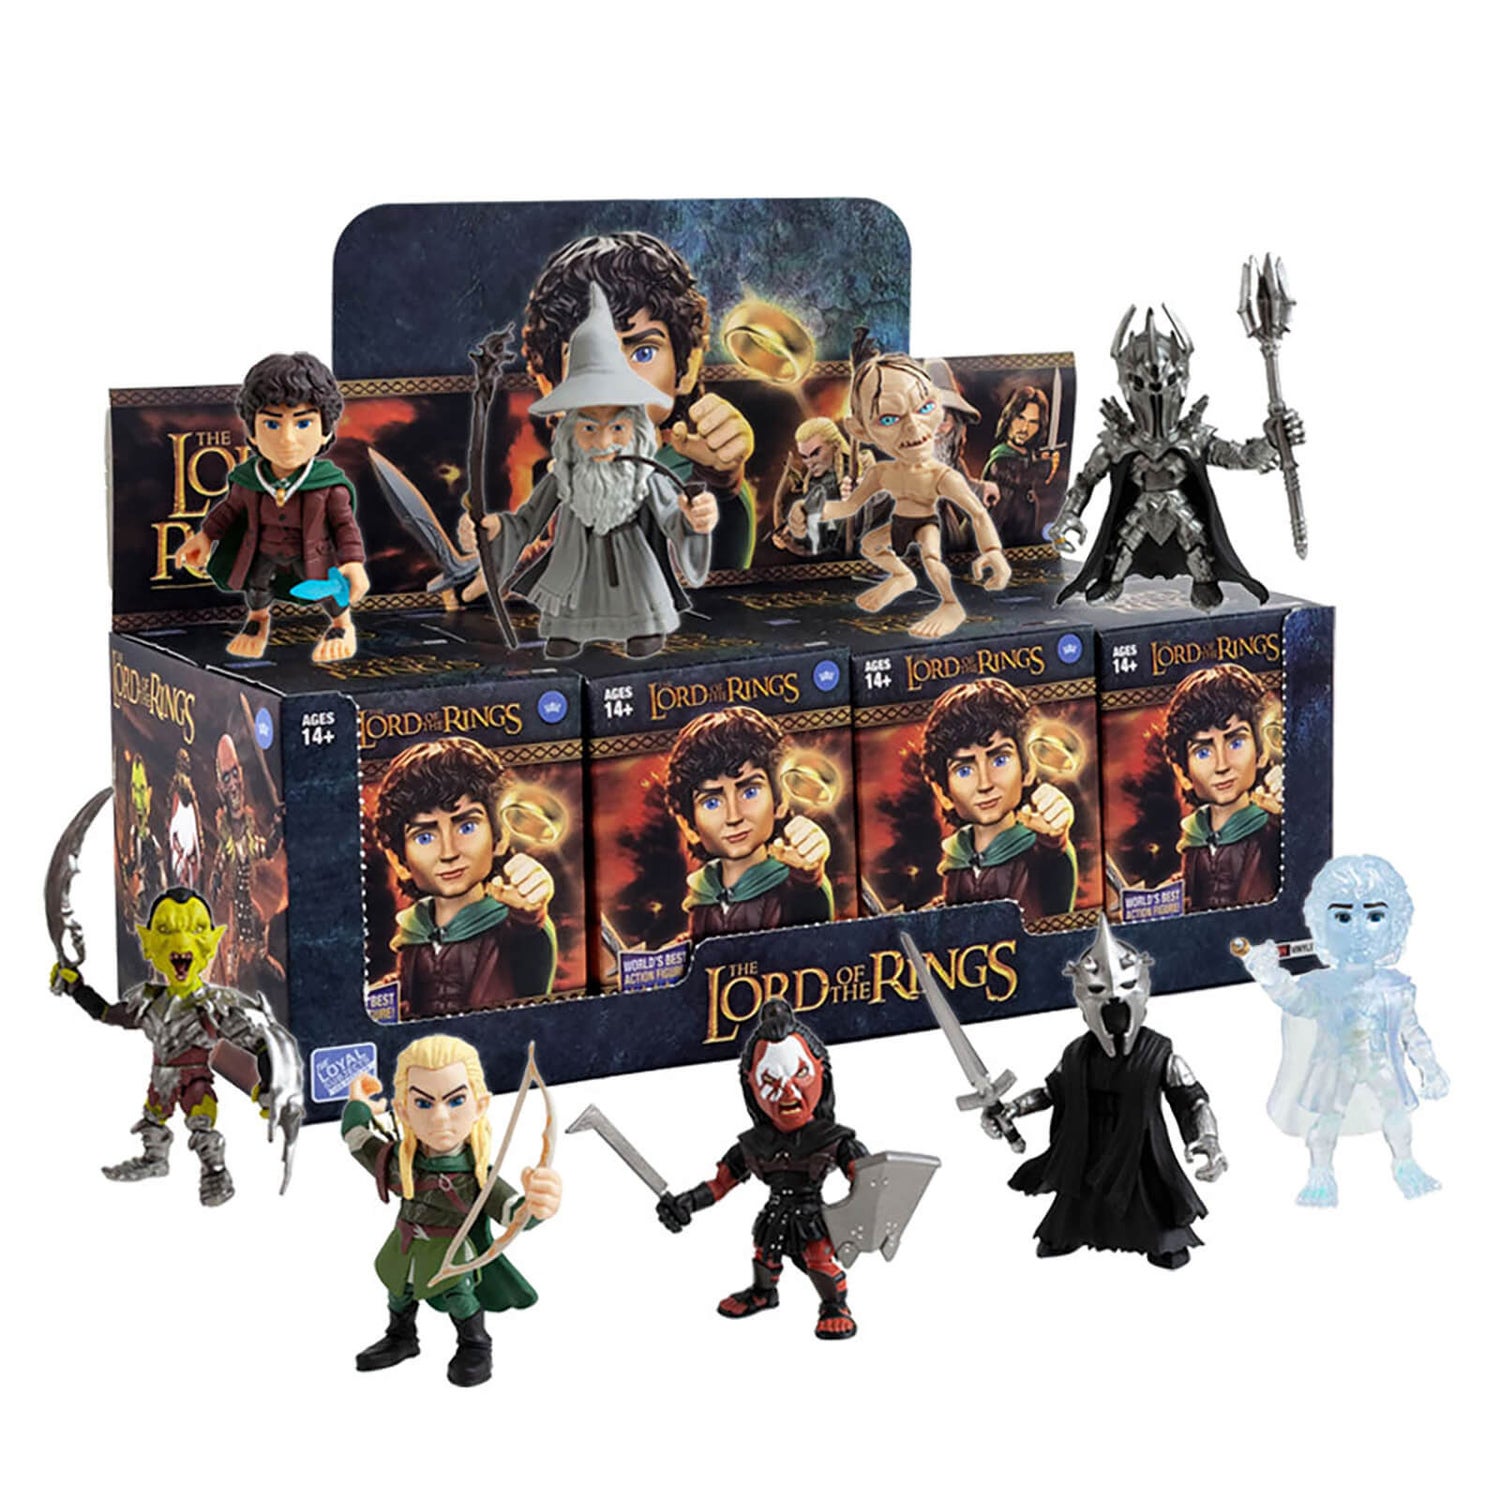 Loyal Subjects Lord of the Rings - Blind Box Action Fig PDQ - 8 Figures Included